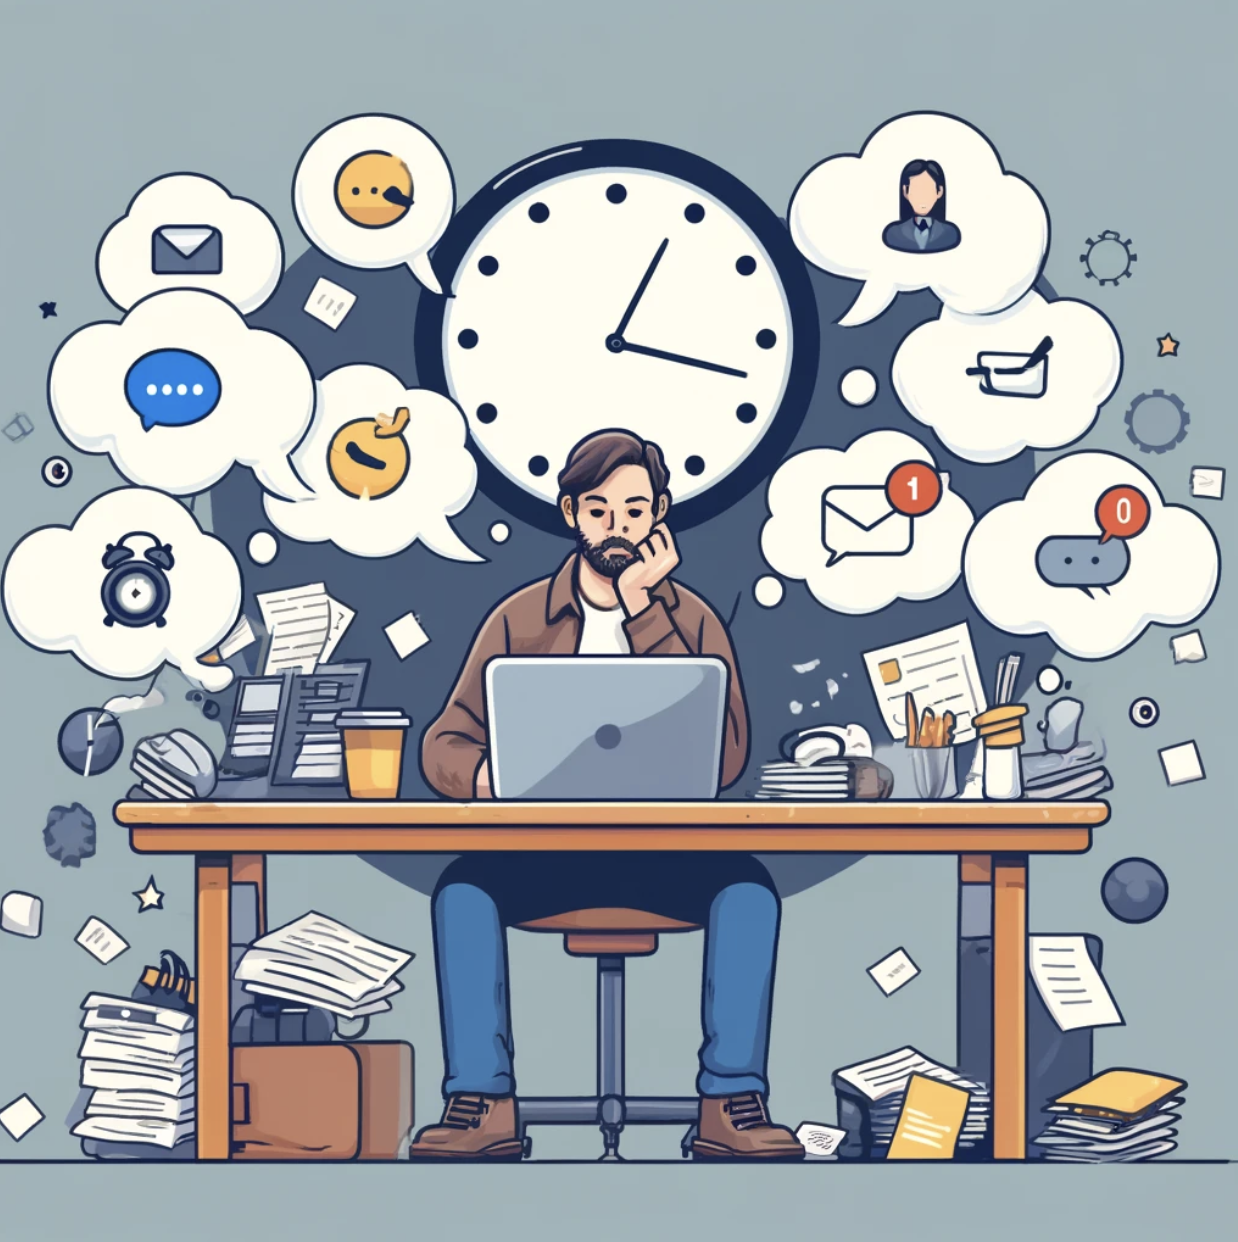 An illustration of a stressed employee sitting at a cluttered desk with a laptop. Various icons and thought bubbles surrounding him depict tasks and notifications, highlighting the overwhelming nature of constant context switching. A large clock in the background emphasizes the time pressure.